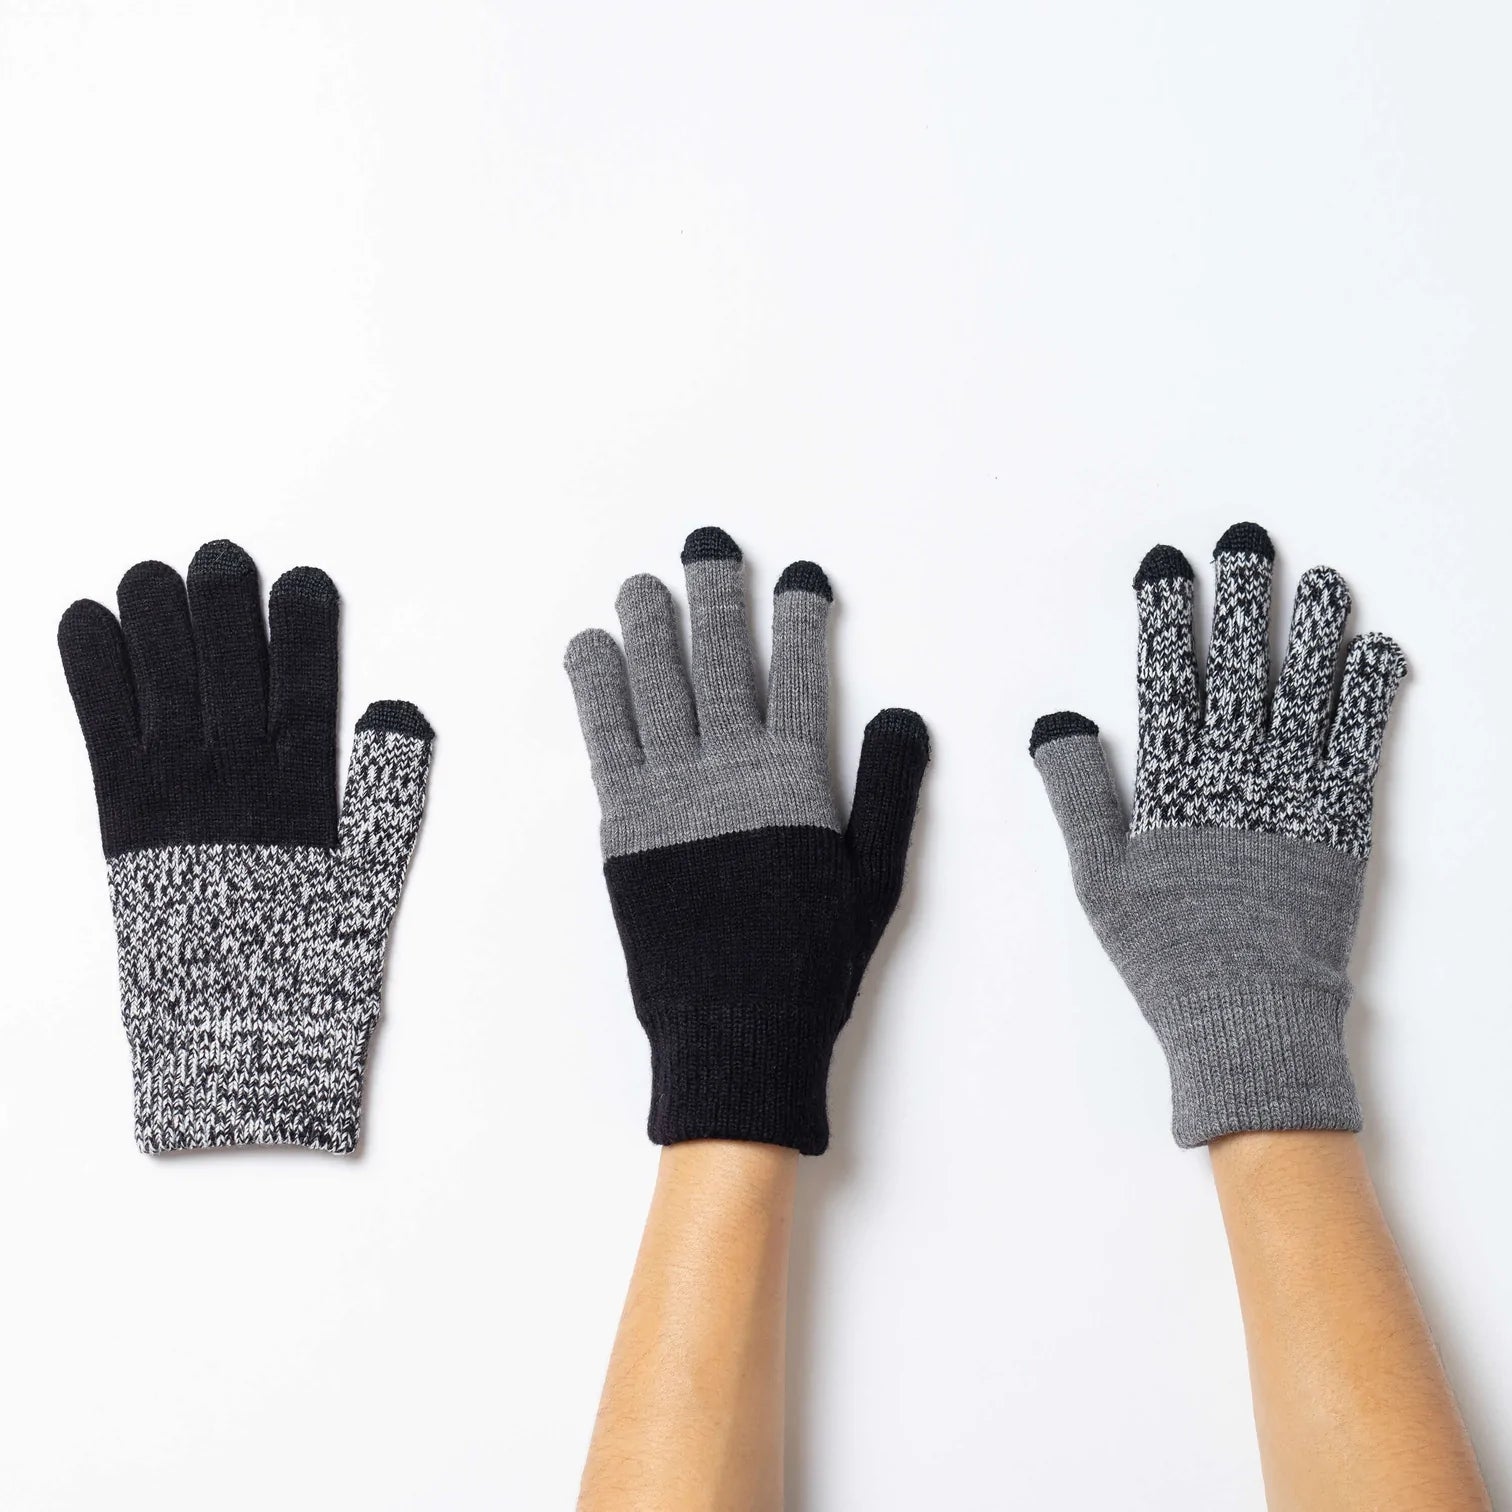 pair and spare touchscreen gloves